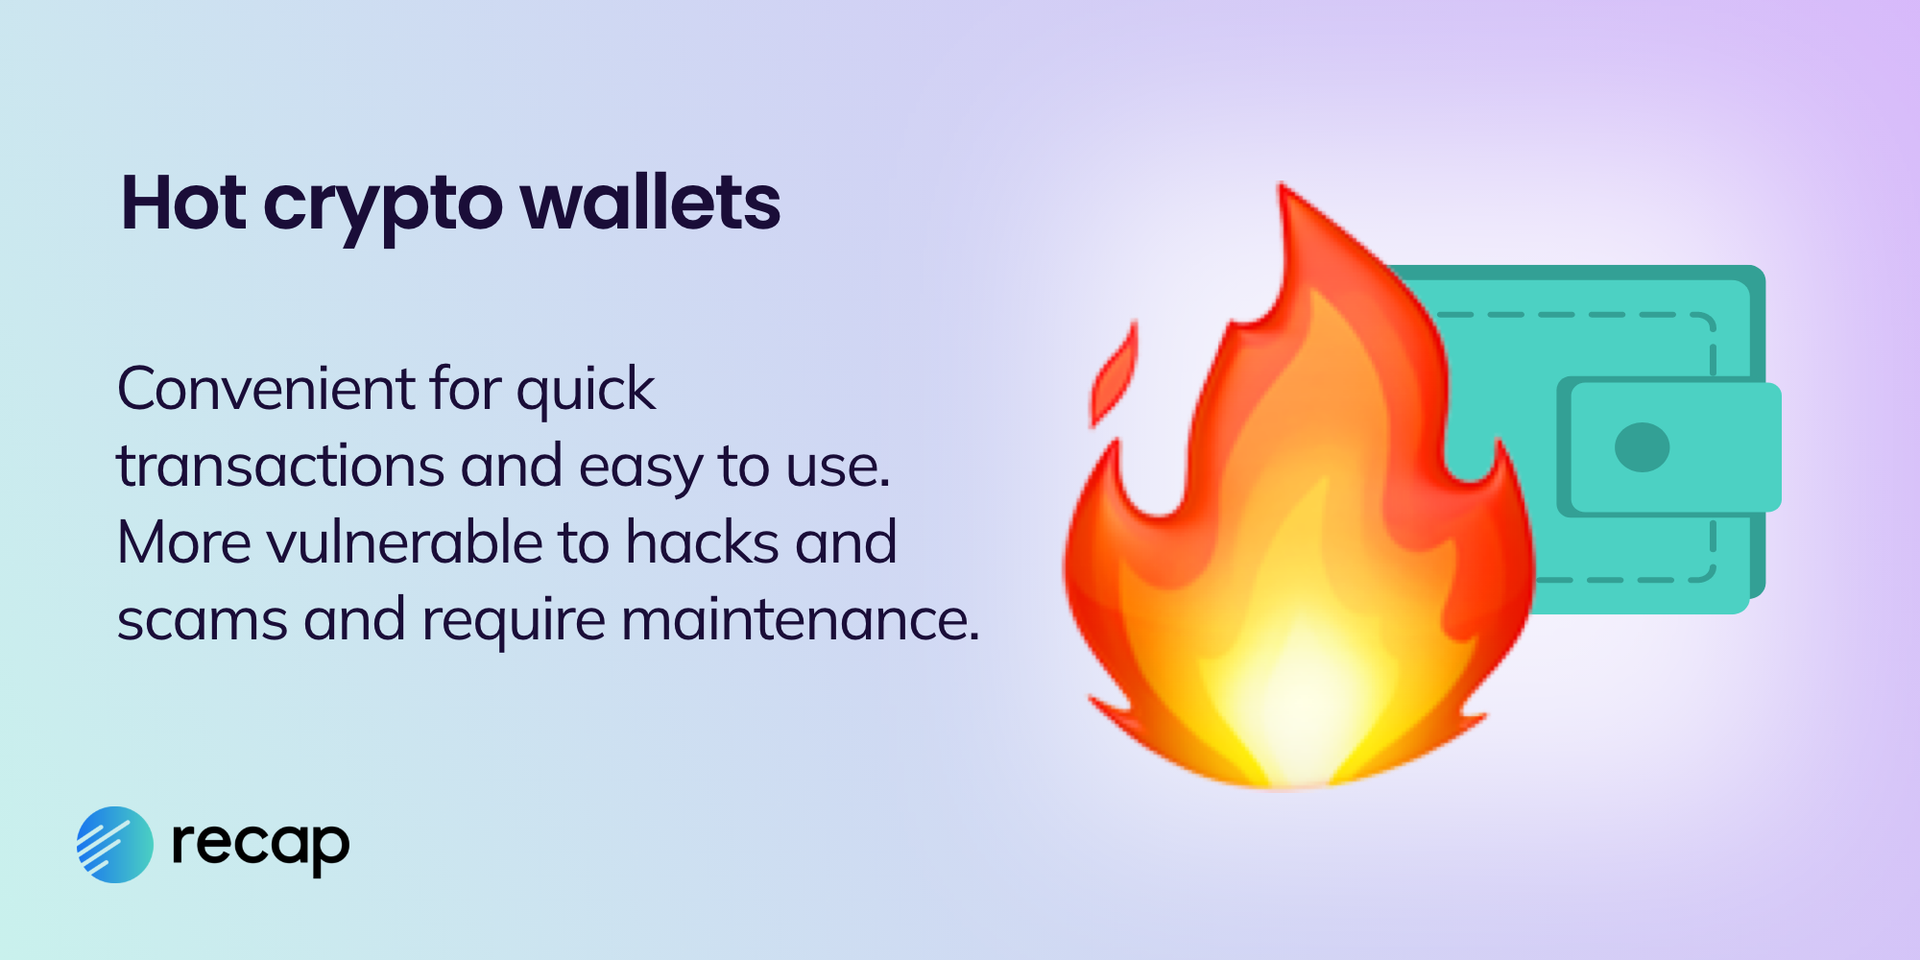 Recap infographic stating that hot wallets are convenient for quick transactions and easy to use, but vulnerable to hacks and require maintenanace.